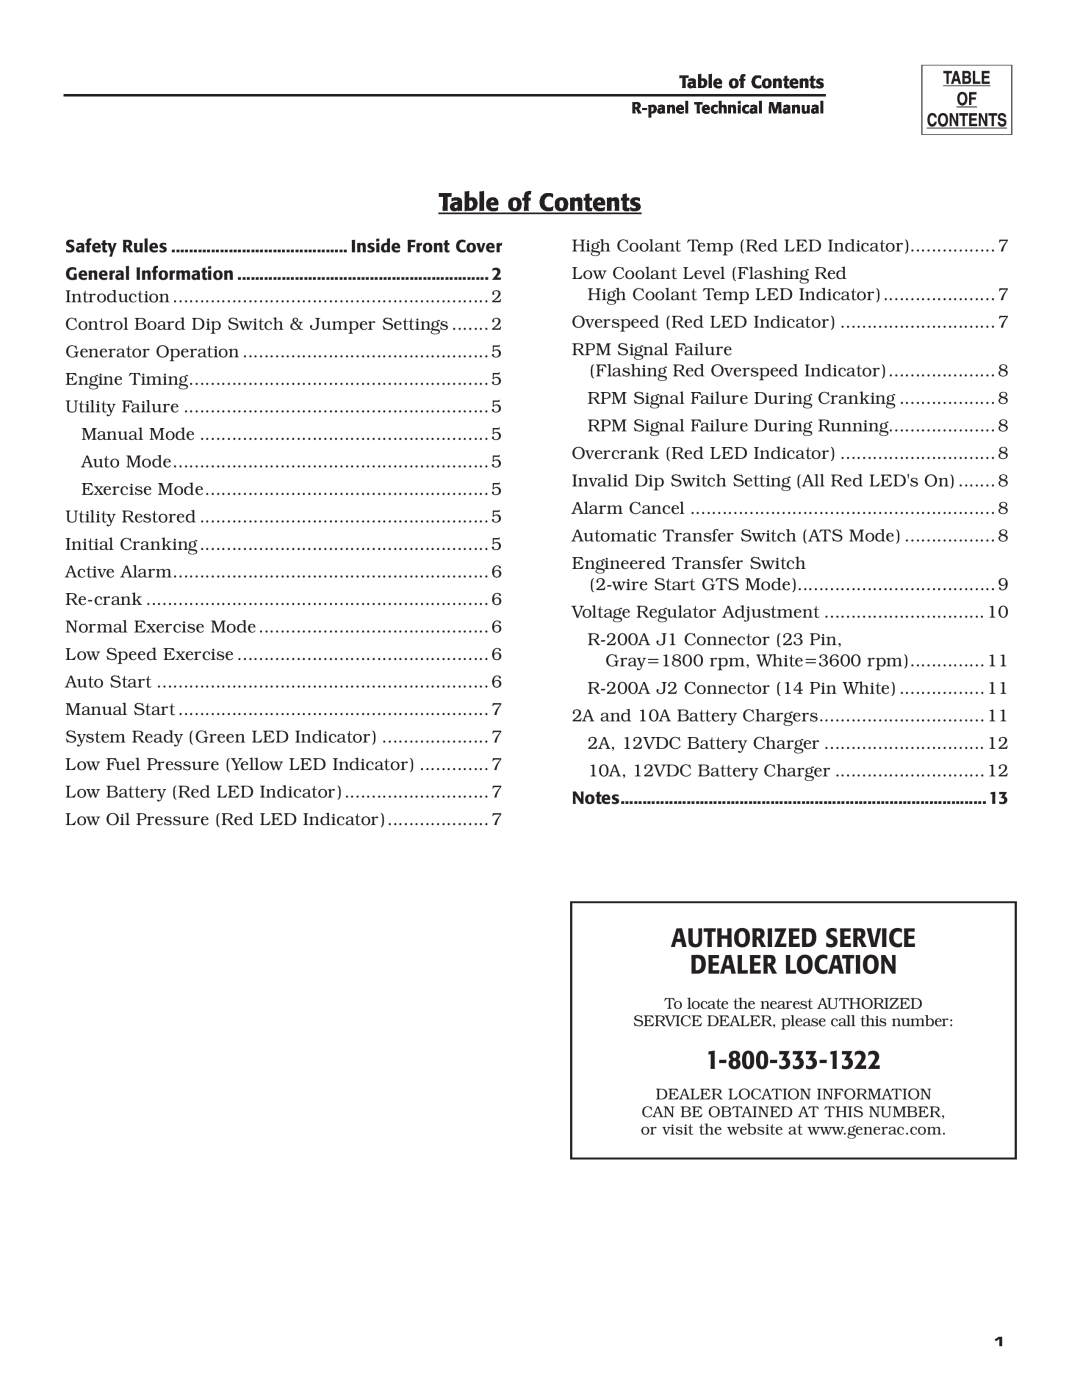 Generac Power Systems R-200A technical manual Authorized Service Dealer Location, Table of Contents, Inside Front Cover 